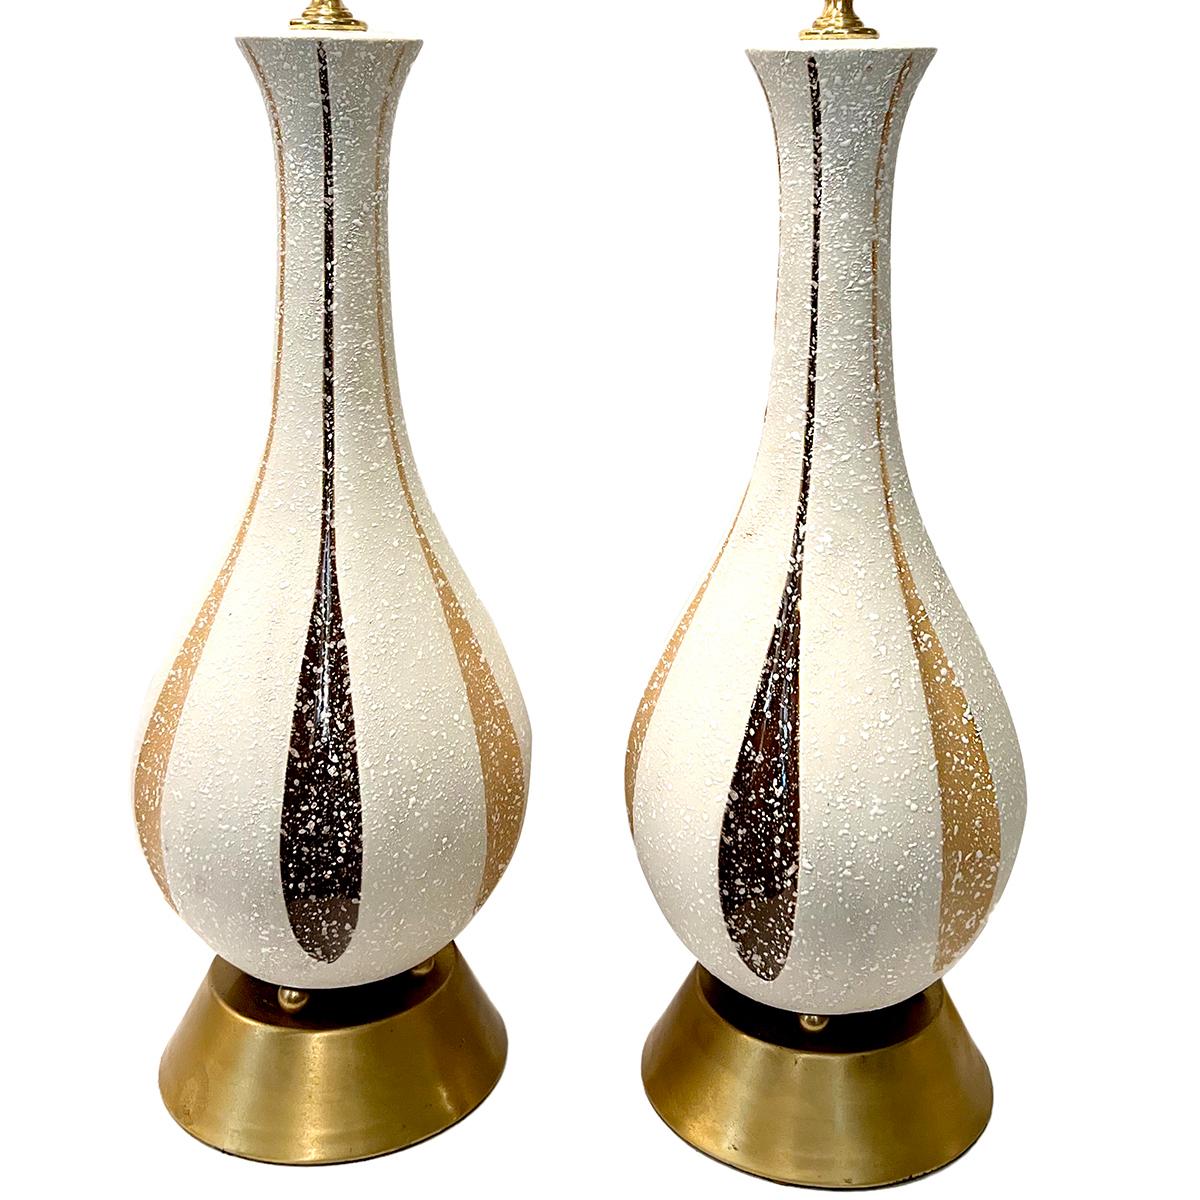 Pair of circa 1950s Italian porcelain lamps.

Measurements:
Height of body: 19.5?
Height to shade rest: 27.5?
Diameter: 6.75?.